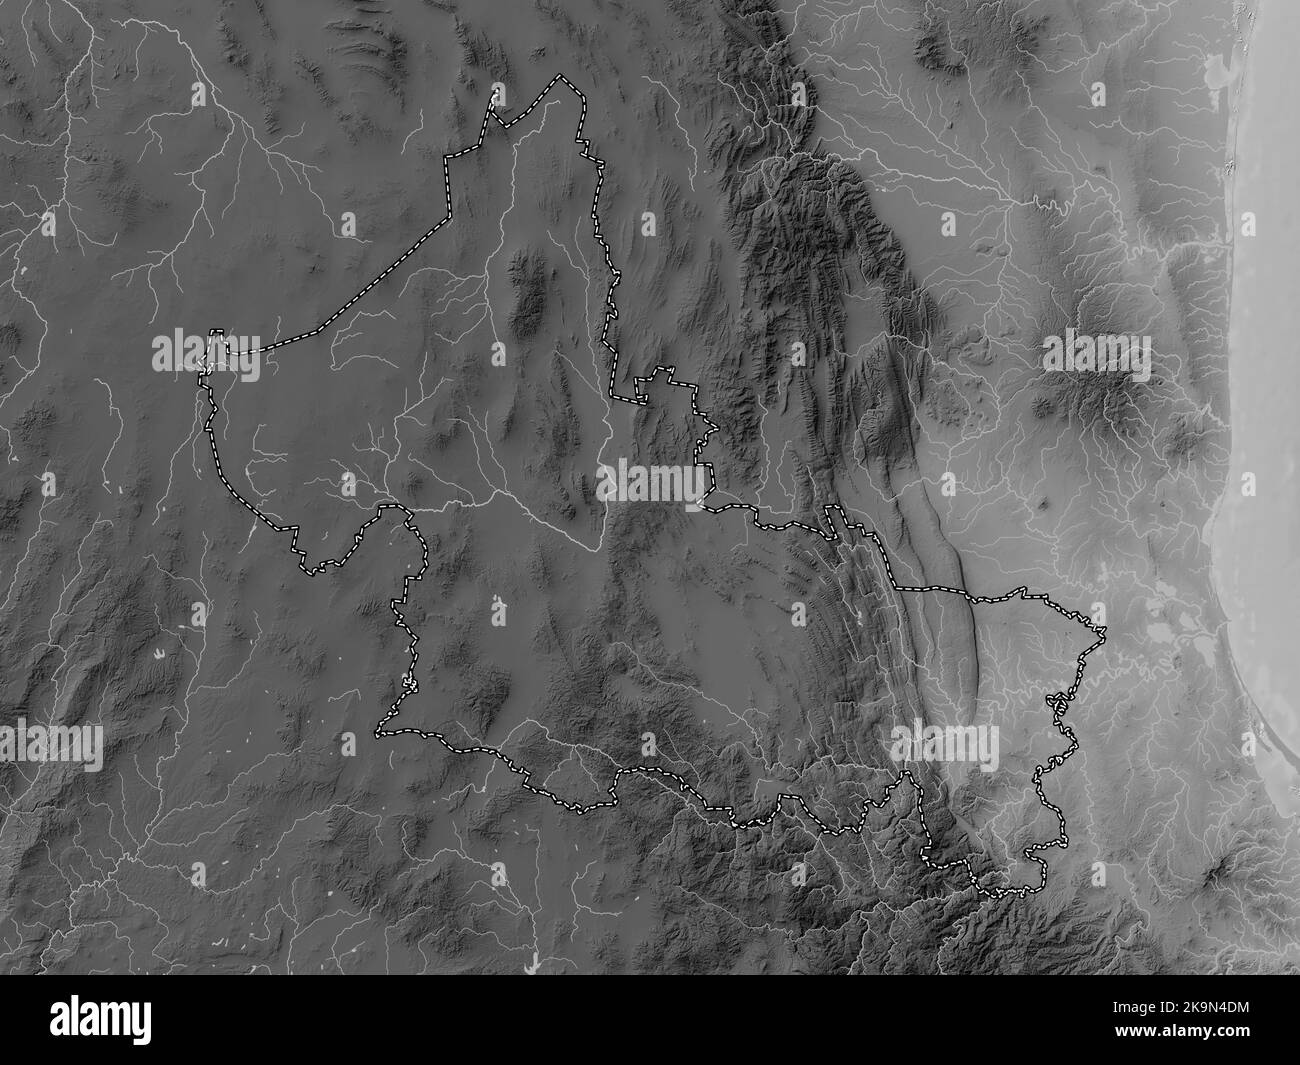 San Luis Potosi, state of Mexico. Grayscale elevation map with lakes and rivers Stock Photo